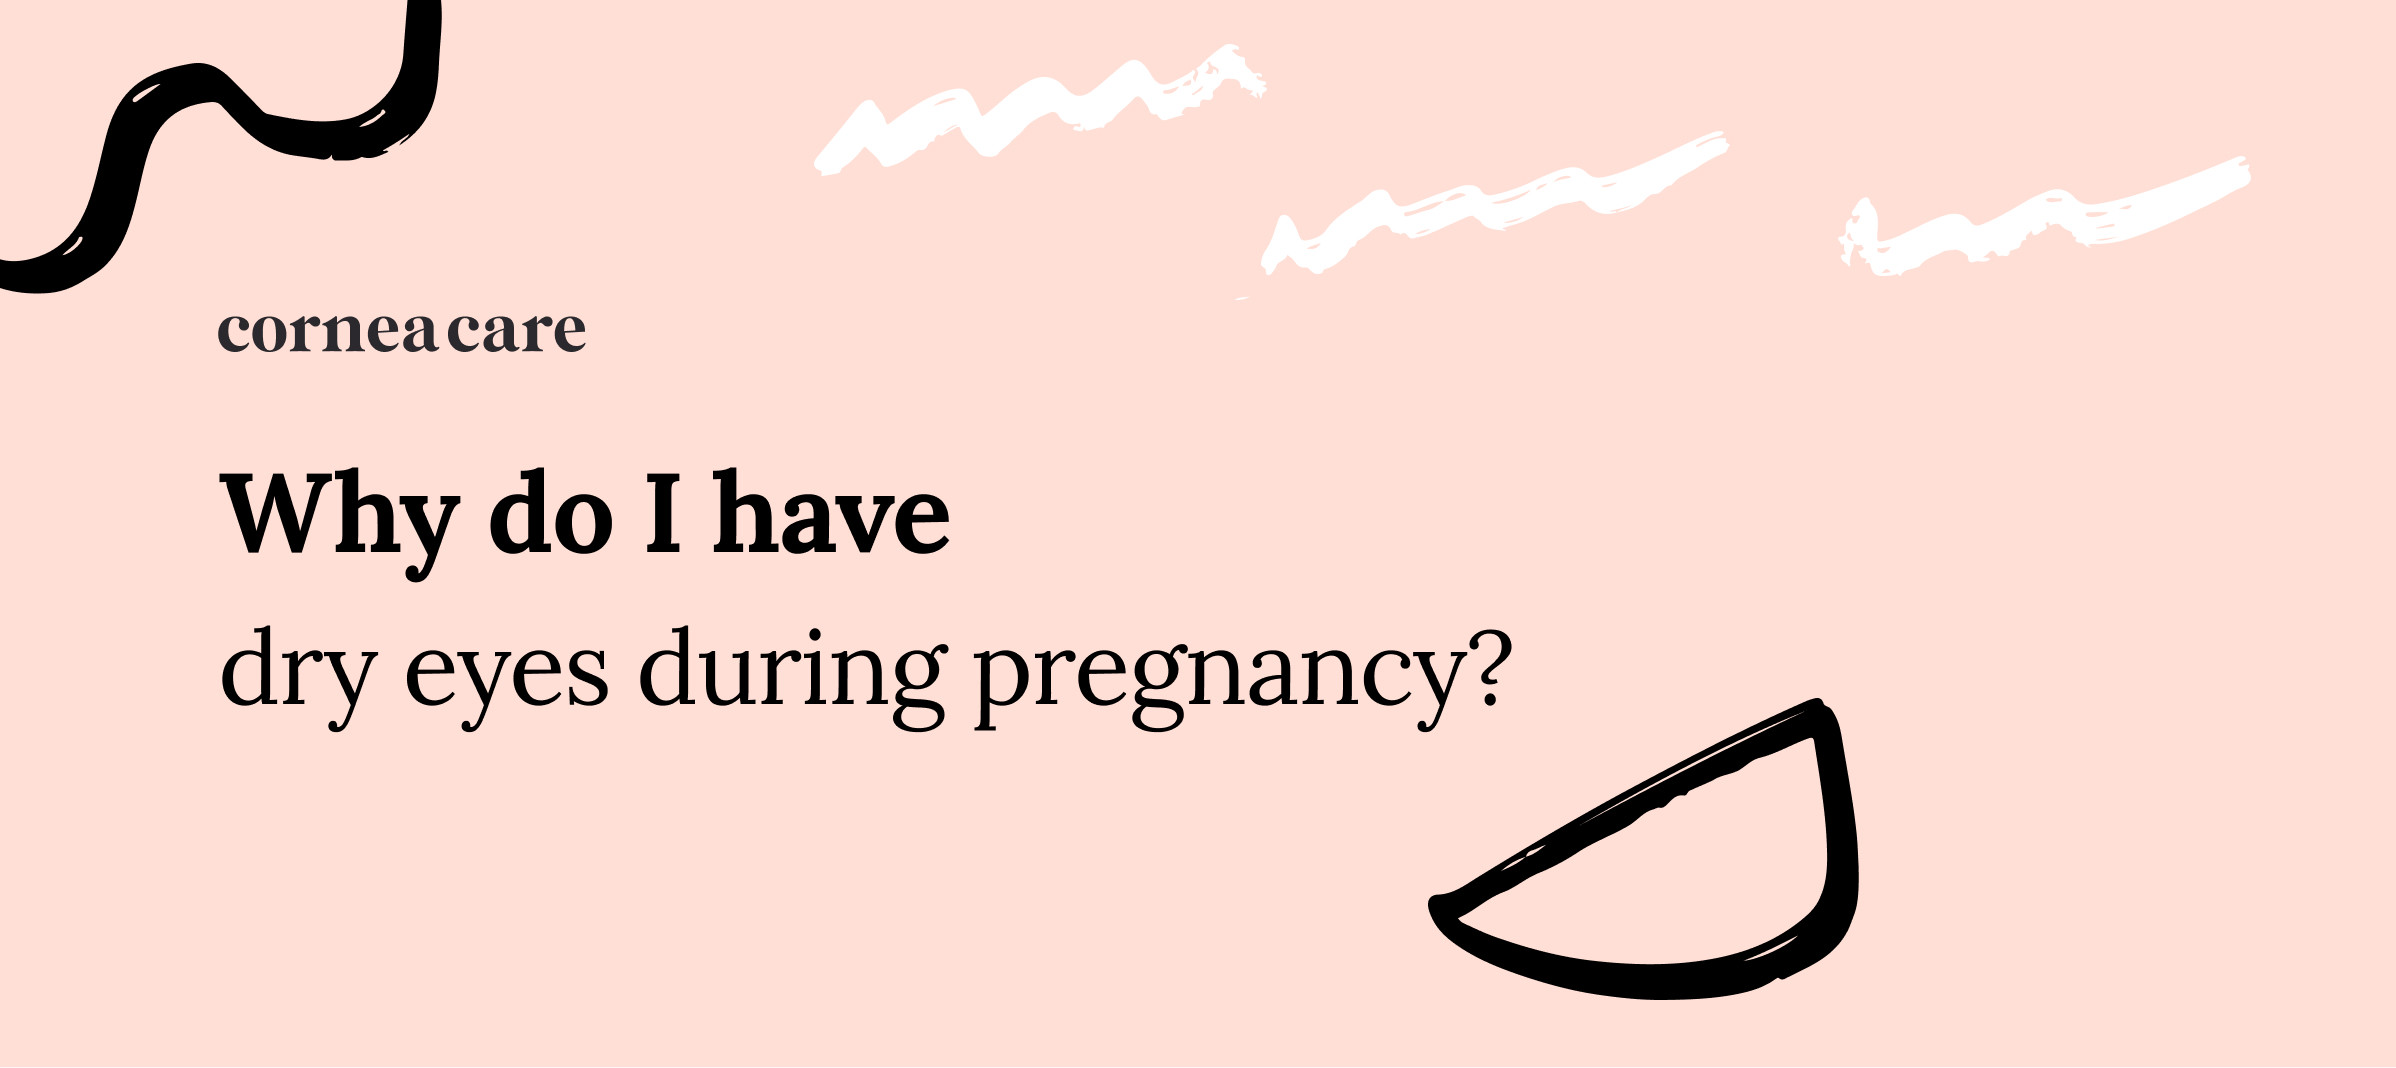 Are dry eyes during pregnancy normal?